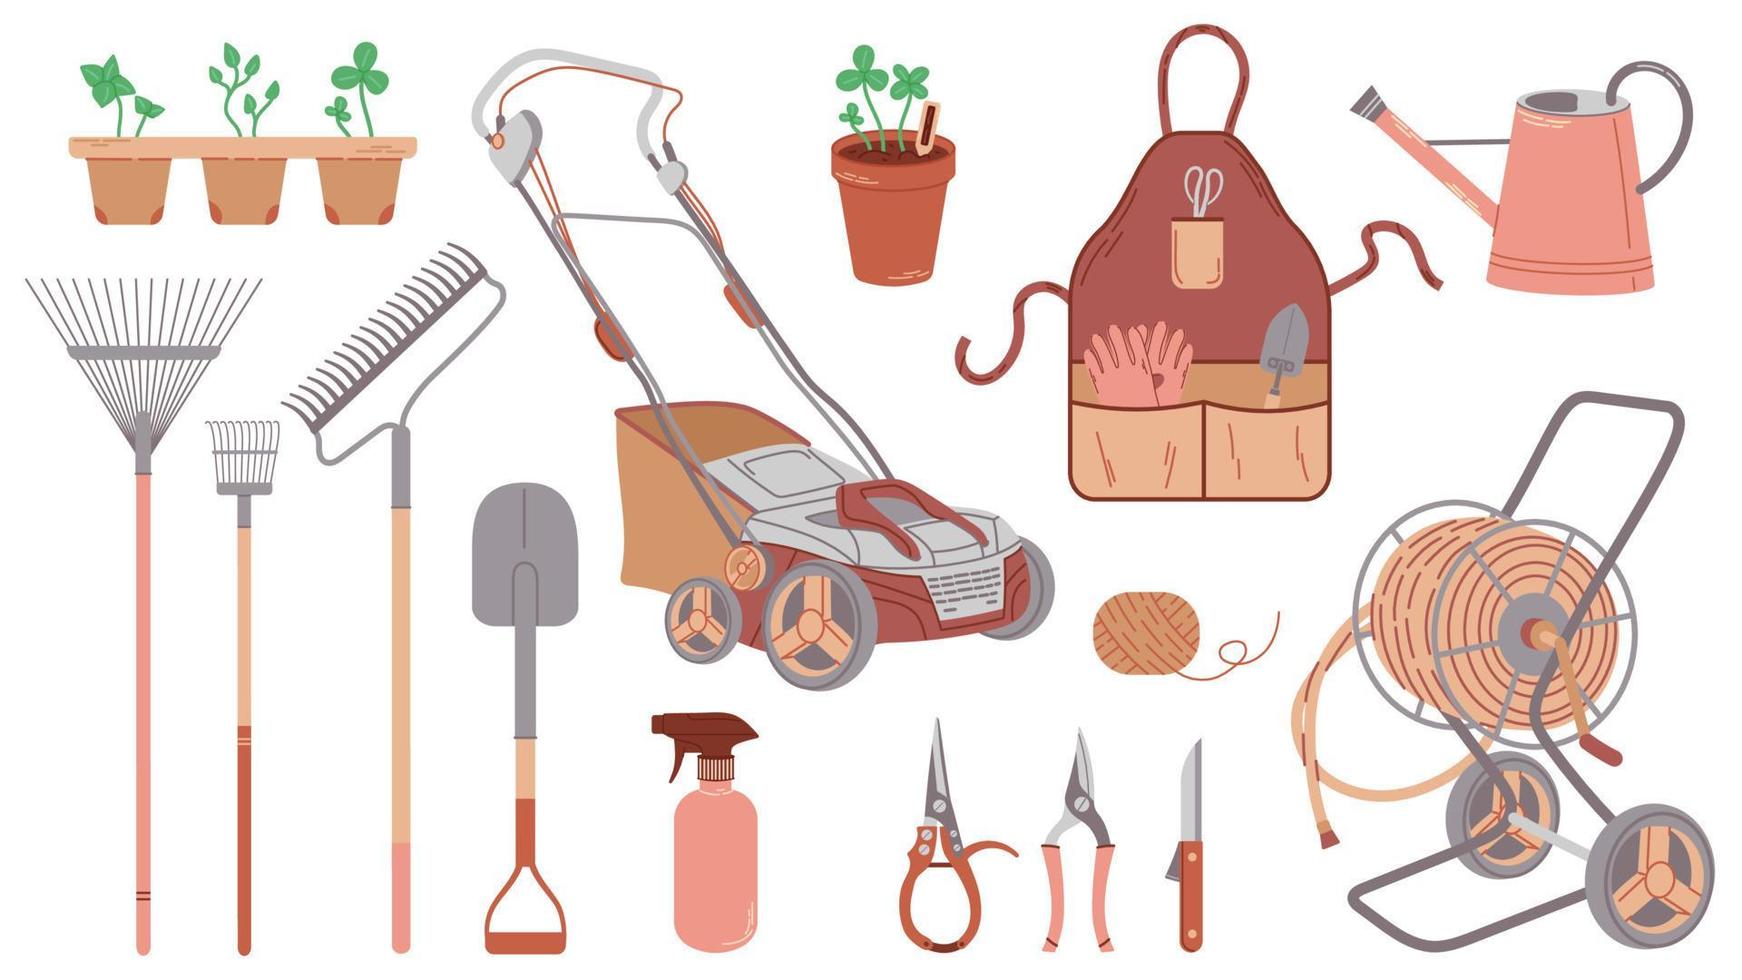 Set illustrations of useful gardening and yard care tools. Lawn mower, garden hose reel, shovel and rake, and other tools isolated on white background. vector